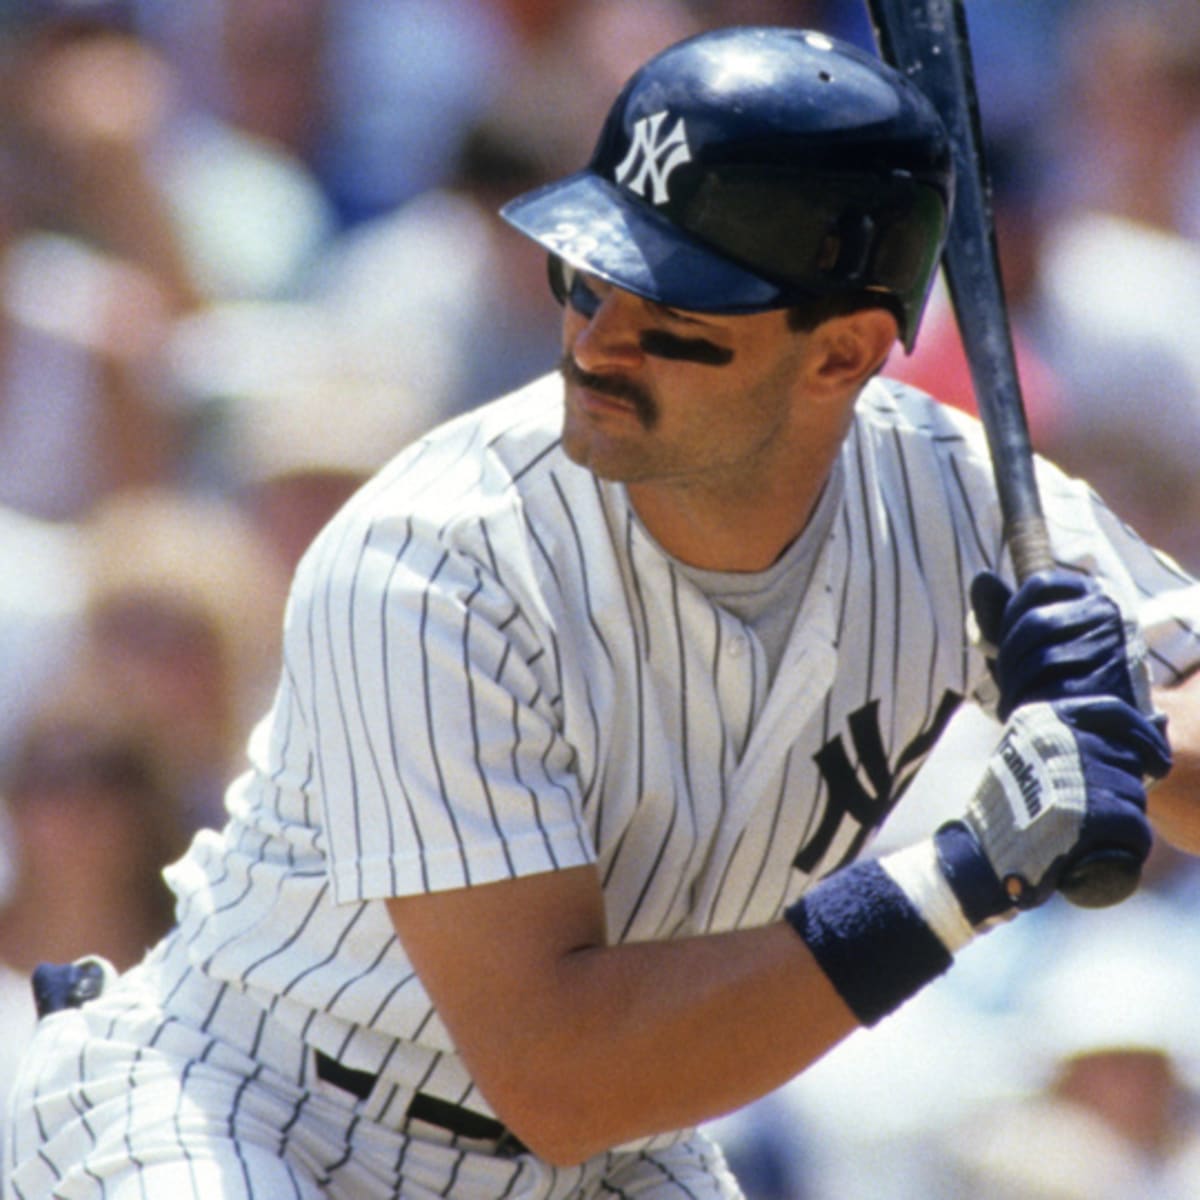 Don Mattingly rose to Yankees fame with 1984 batting title